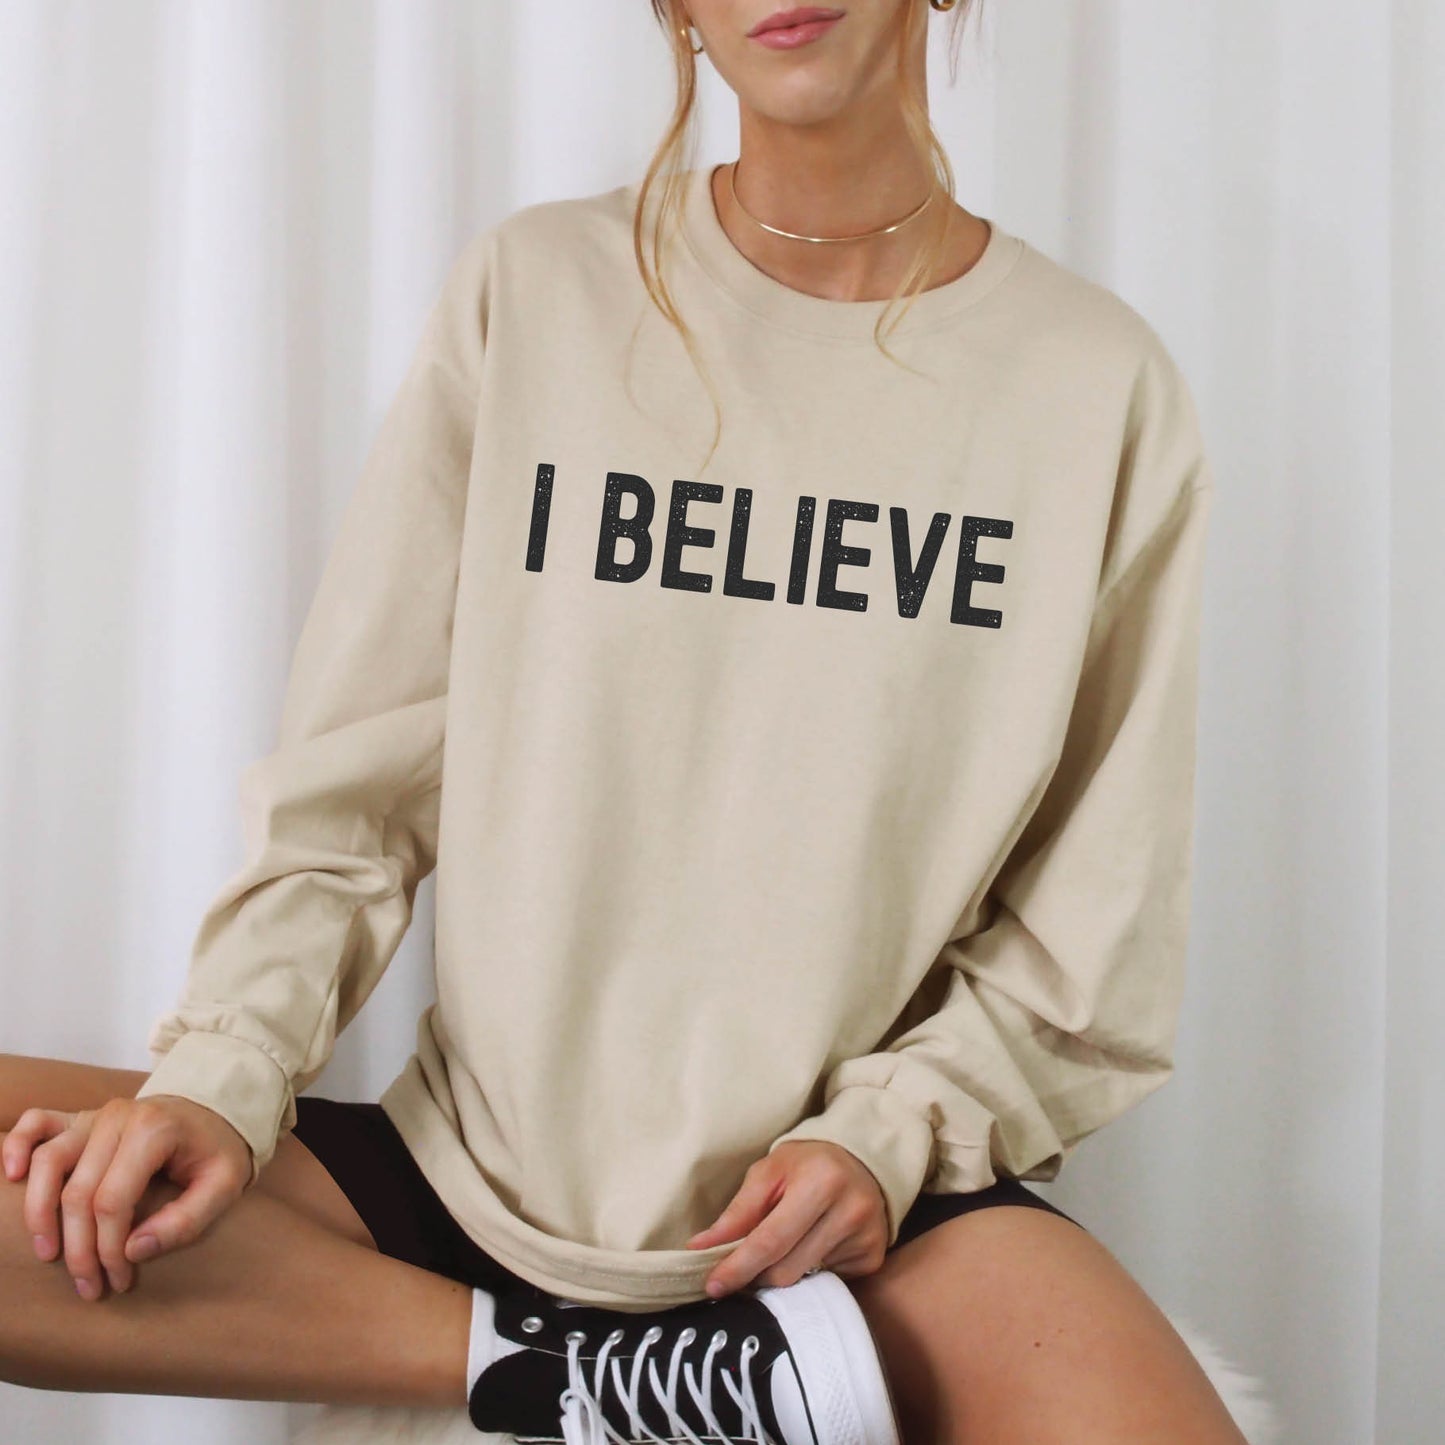 Sand beige color cozy long sleeve t-shirt with a bold faith-based statement "I BELIEVE" distressed typography design printed in black, created for Christian men and women Jesus believers